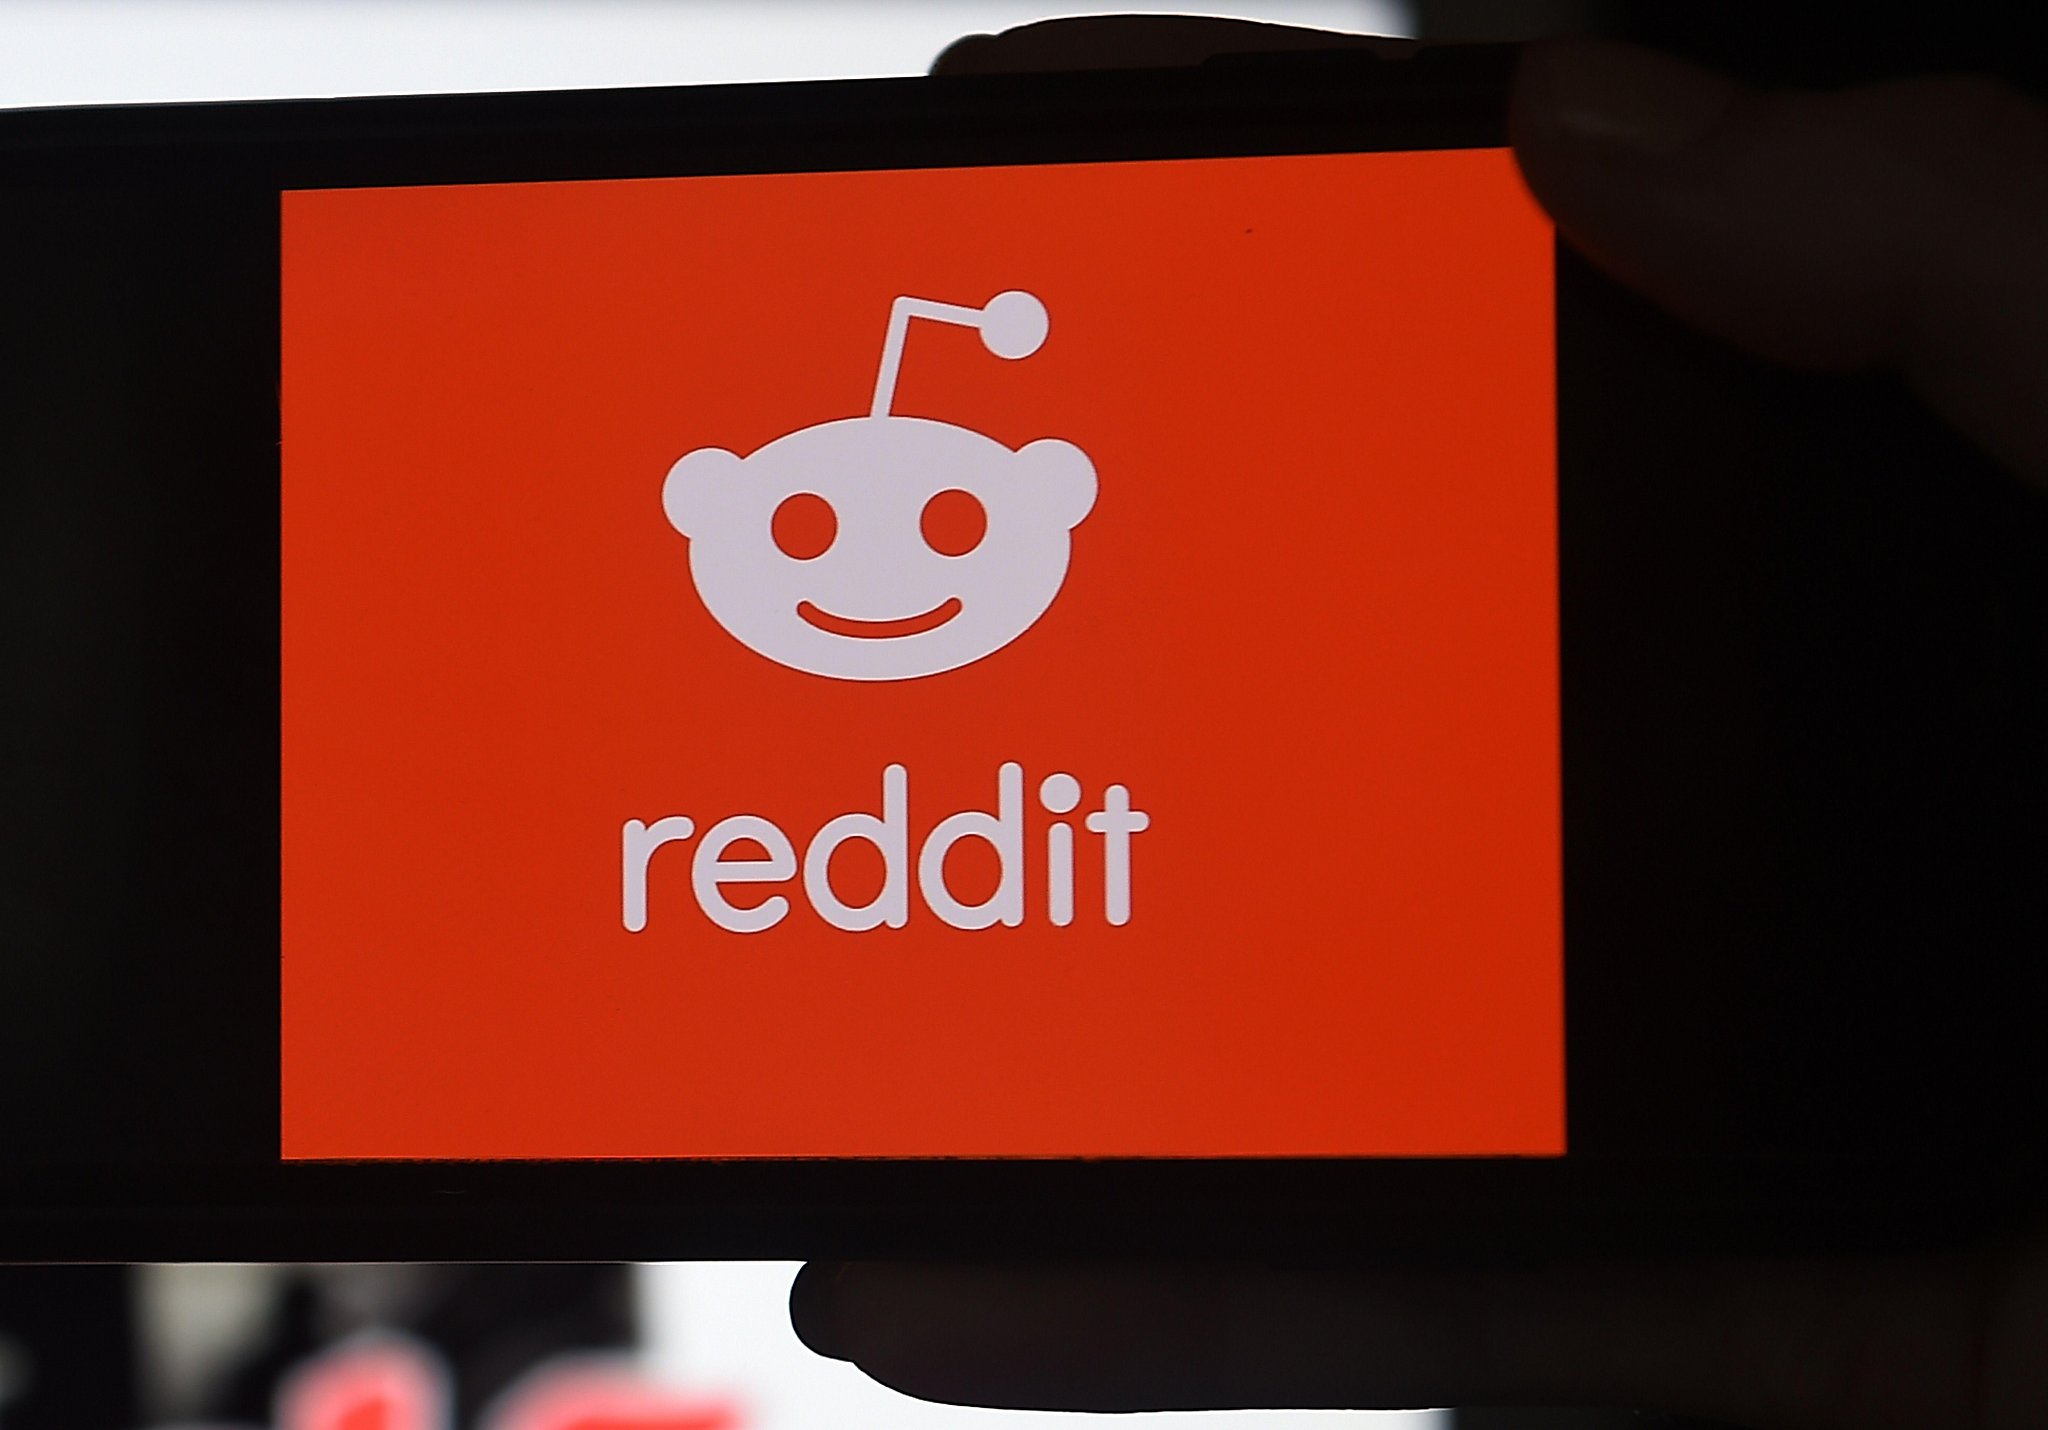 Reddits five-second Super Bowl ad honored underdogs in GameStop frenzy